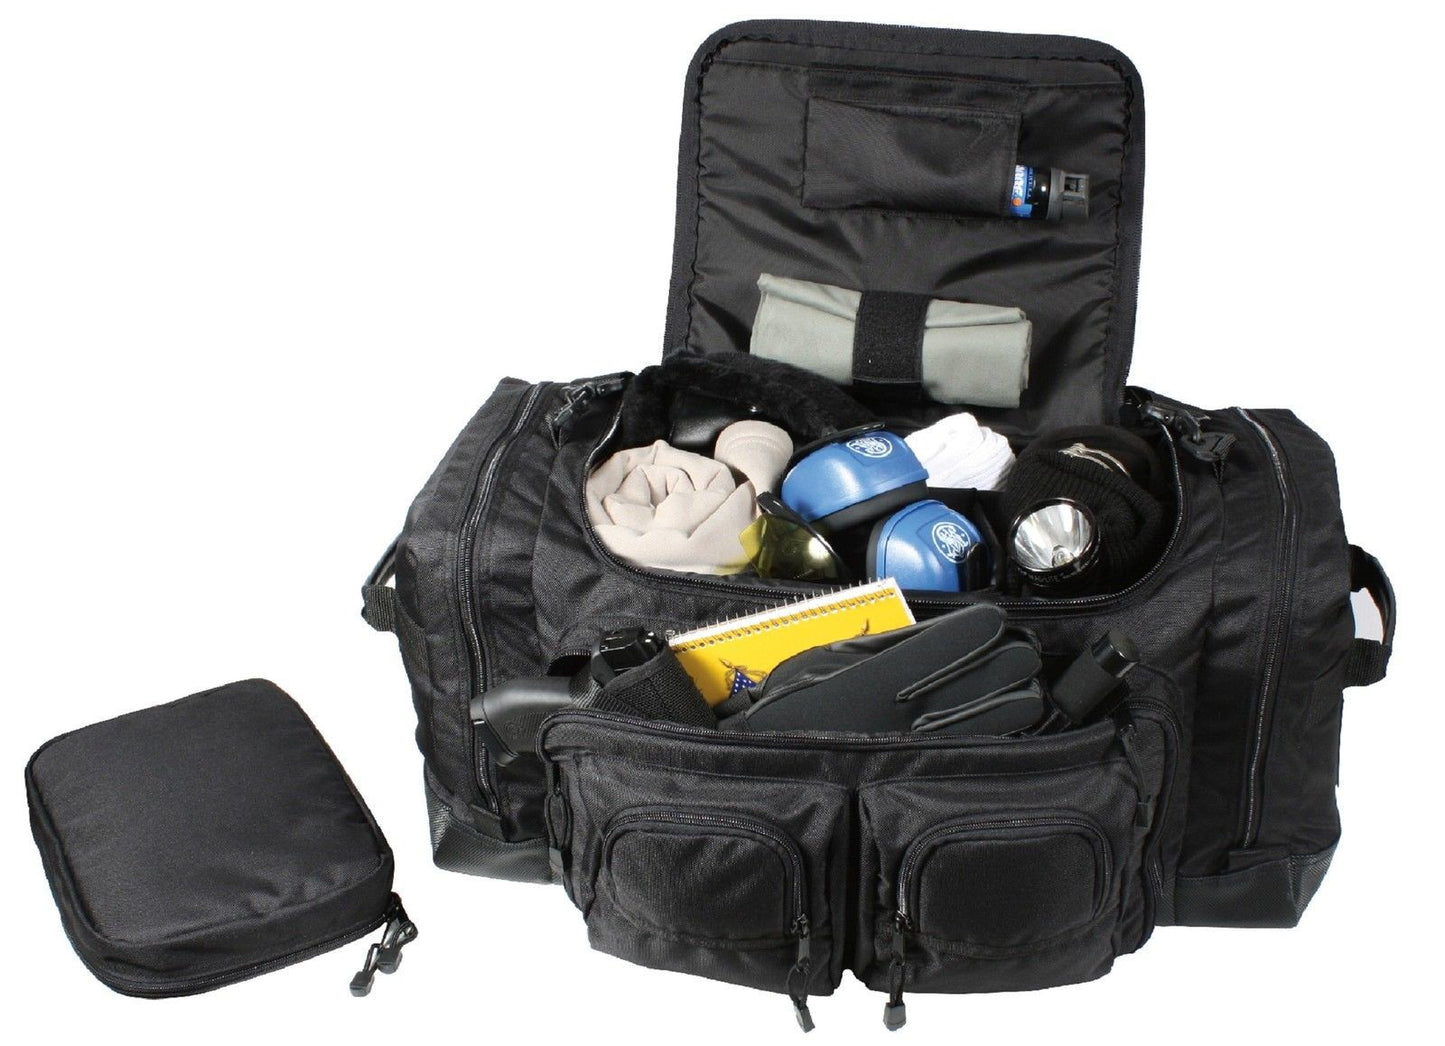 Deluxe Police Law Enforcement Gear Bag - Black Security Equipment Pack Bags